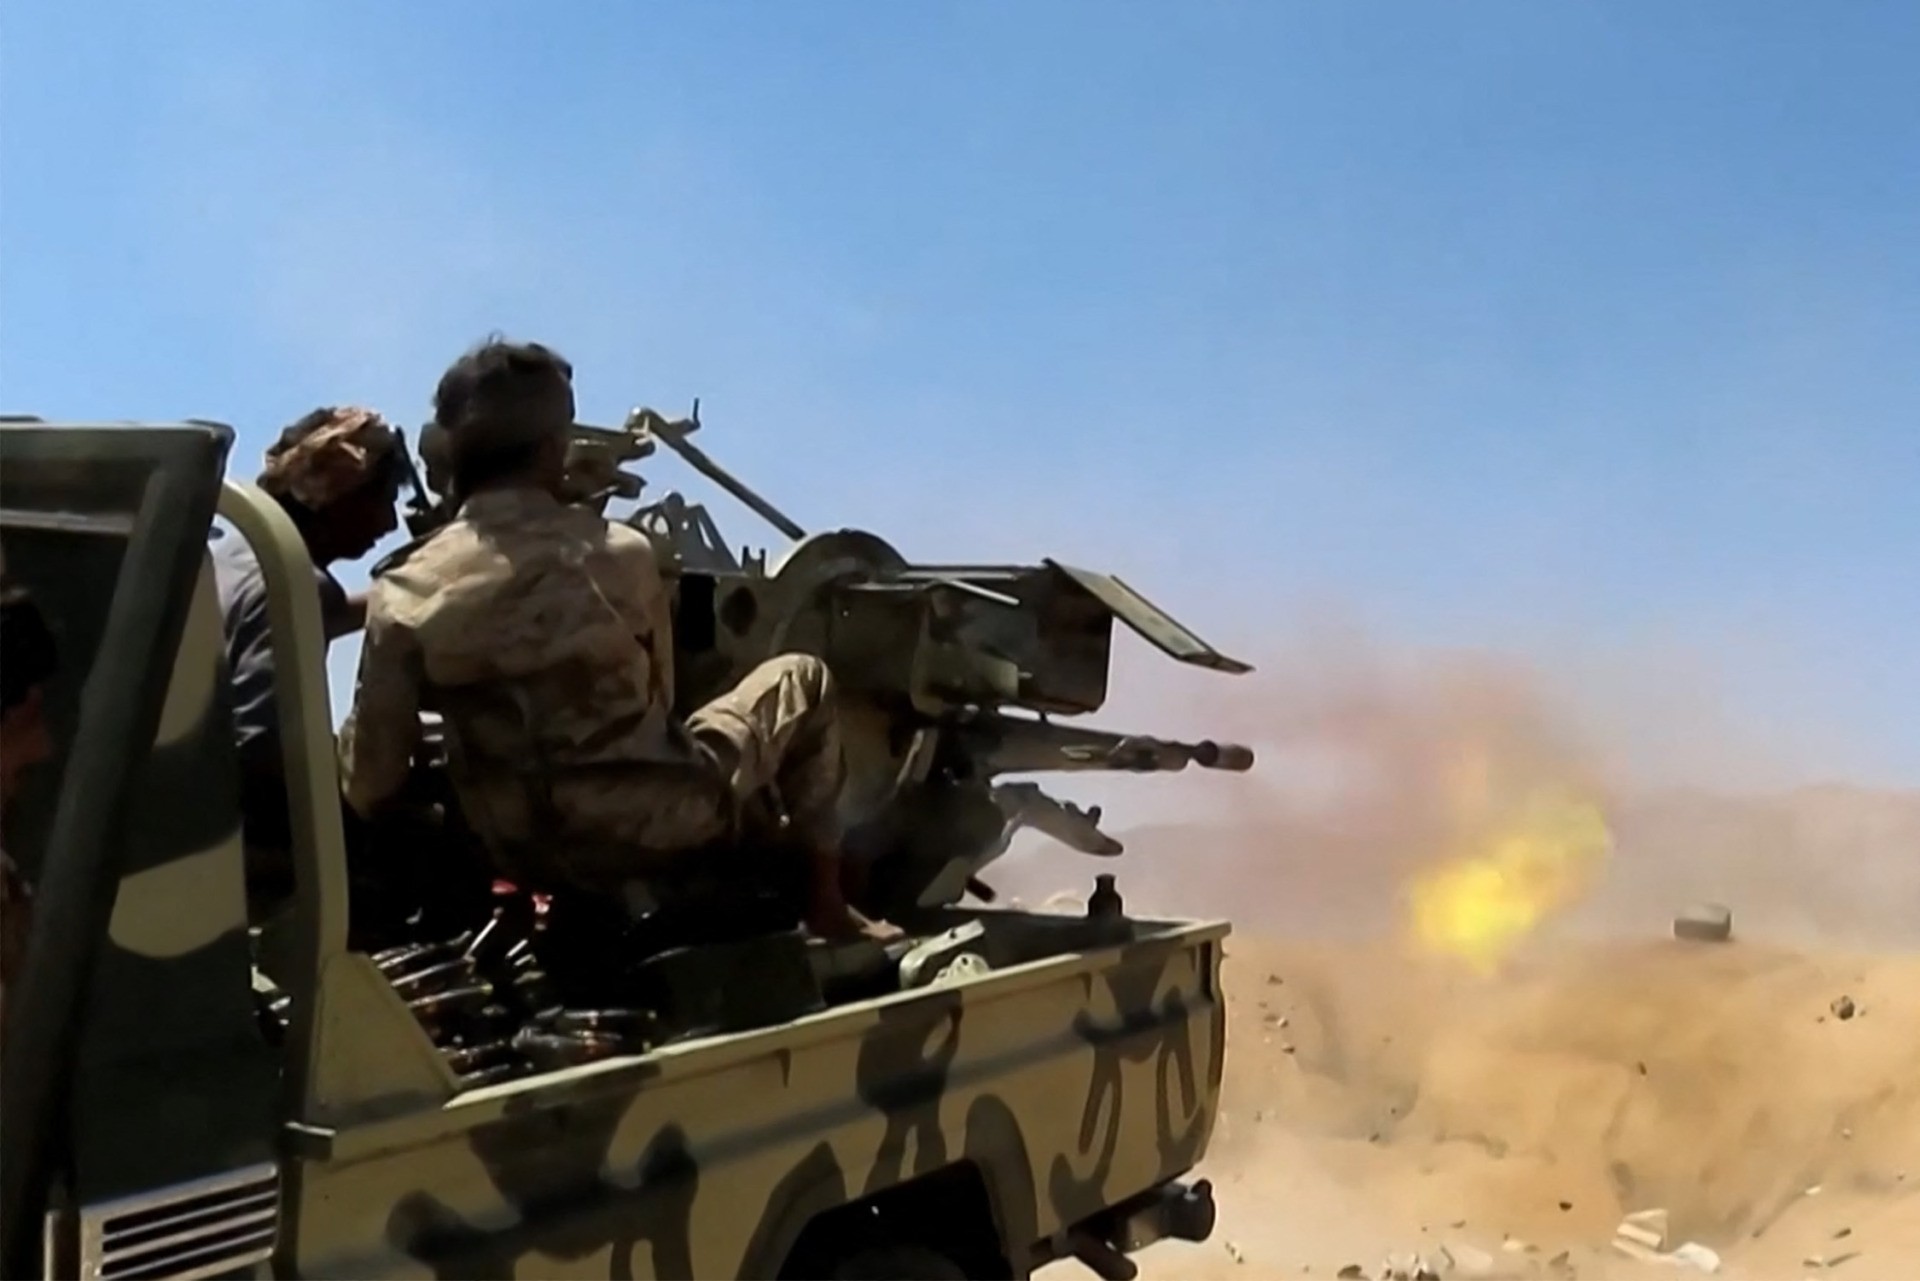 A grab from an AFPTV video shows a fighter loyal to Yemen's Saudi-backed government firing a turret mounted in the back of a pickup truck (technical) at a position near the frontlines against the Huthi rebel forces in the region of al-Kassara, northwest of Marib, on June 28, 2021. - Clashes between rebels and Yemeni government fighters left over a hundred killed in Marib in three days, pro-government sources said, following a renewed offensive by the Iran-allied Huthis who escalated their efforts to seize the government's last stronghold in northern Yemen. (Photo by - / AFPTV / AFP) (Photo by -/AFPTV/AFP via Getty Images)